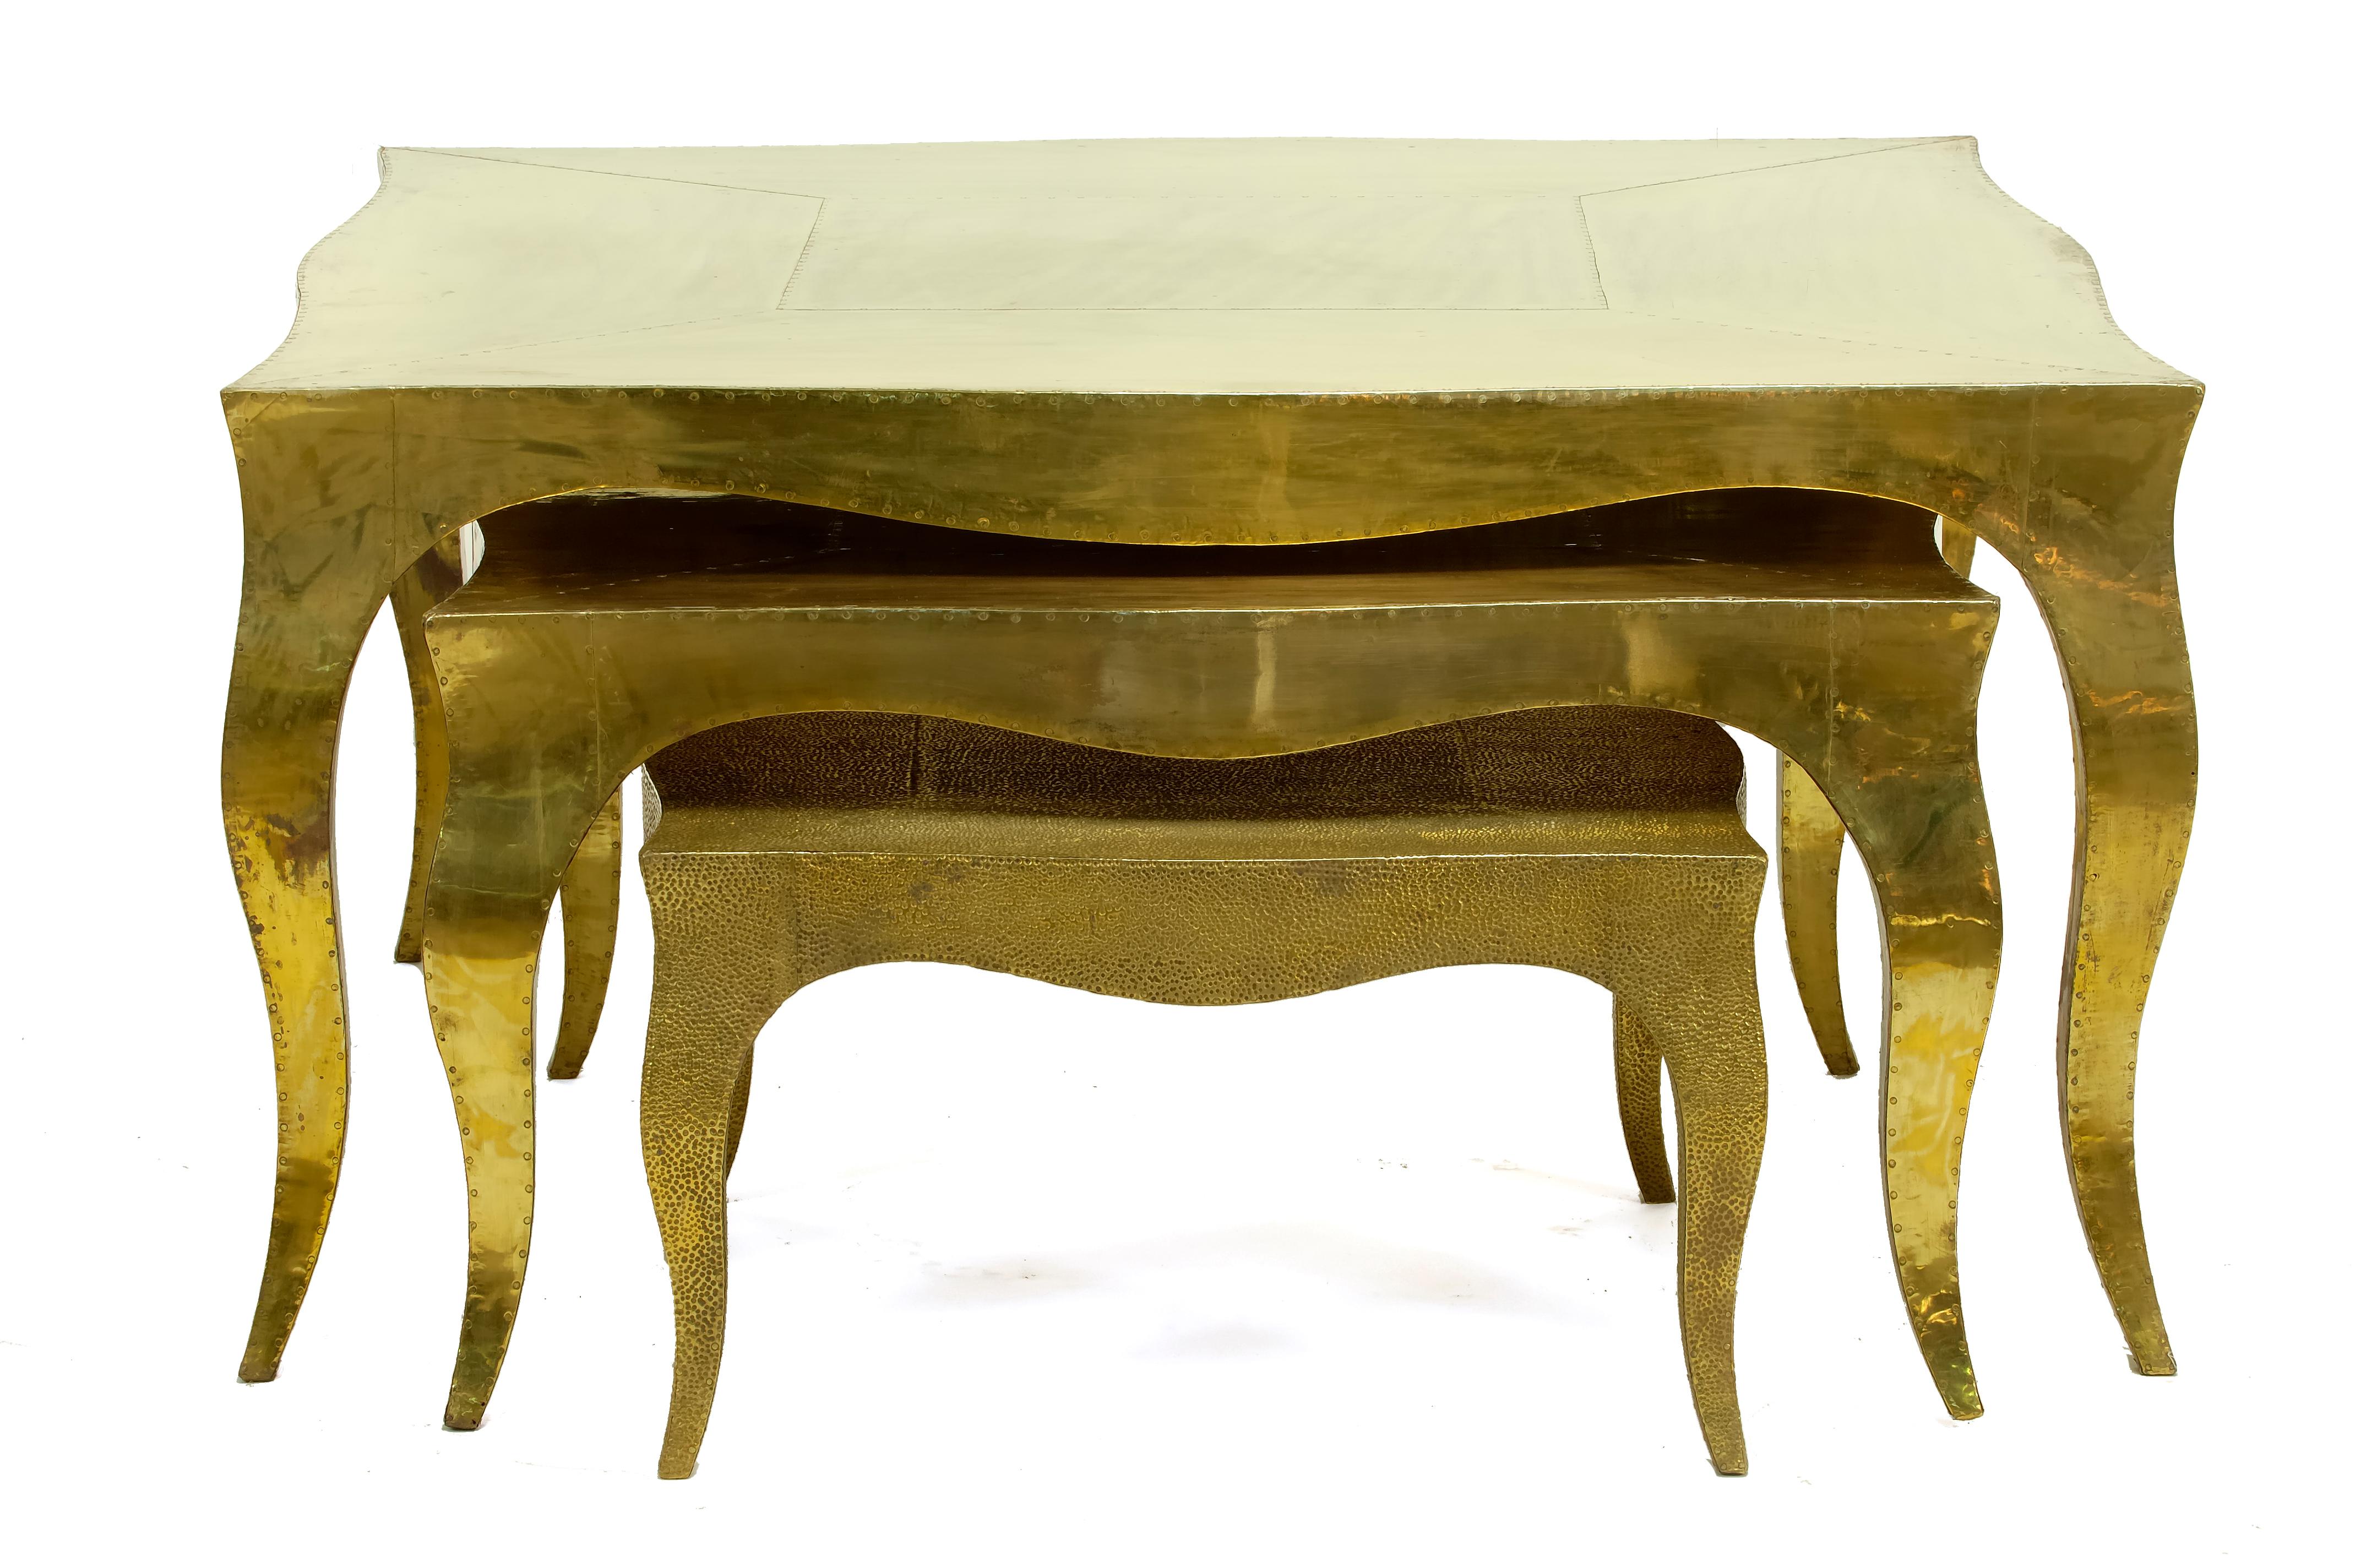 Louise Art Deco Nesting Tables Smooth Brass 18.5x18.5x10 inch by Paul M. en vente 6